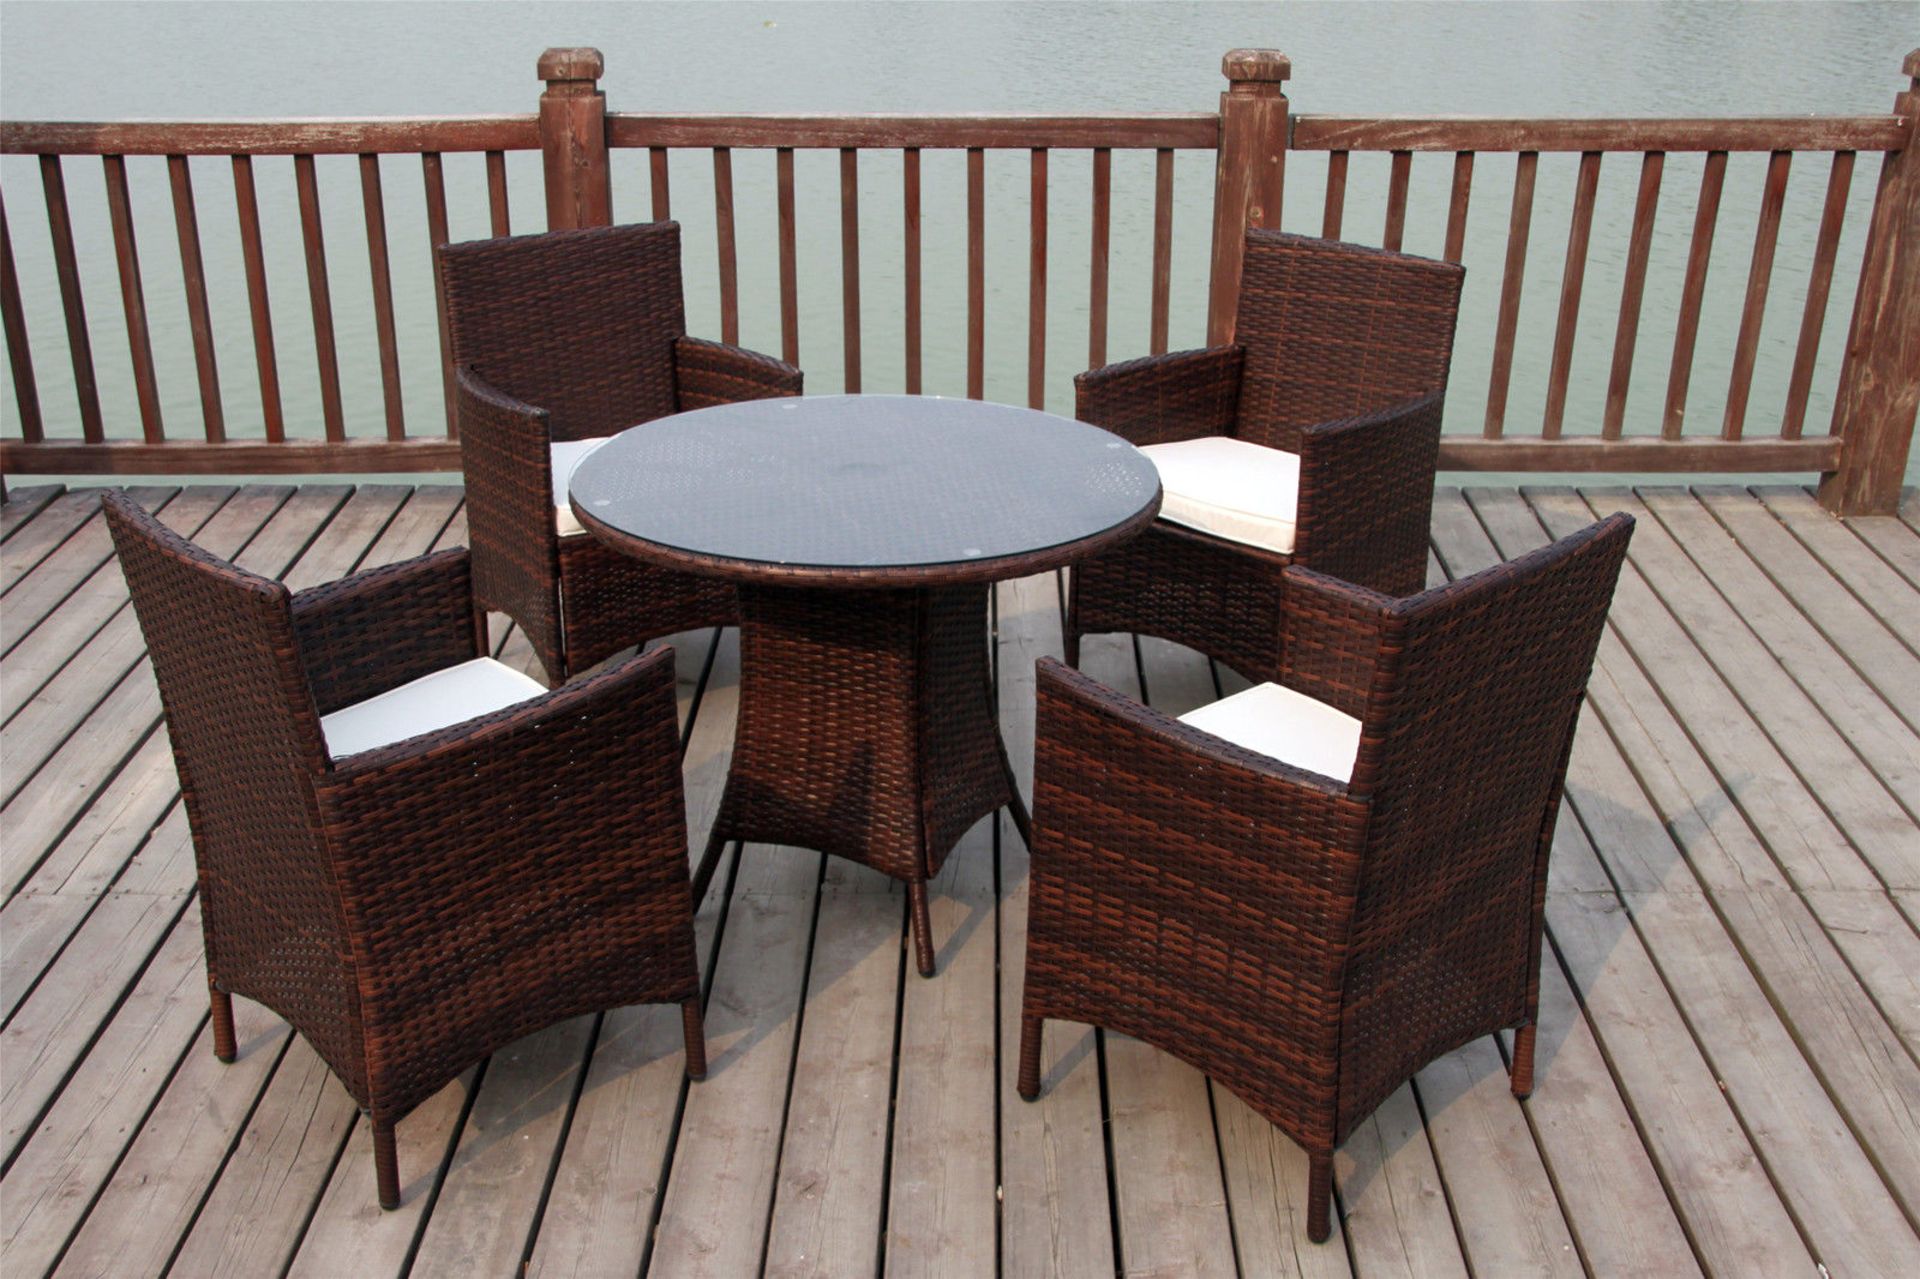 + VAT Brand New Chelsea Garden Company 4-Person Light Brown Rattan Outdoor Dining Set - Includes 4